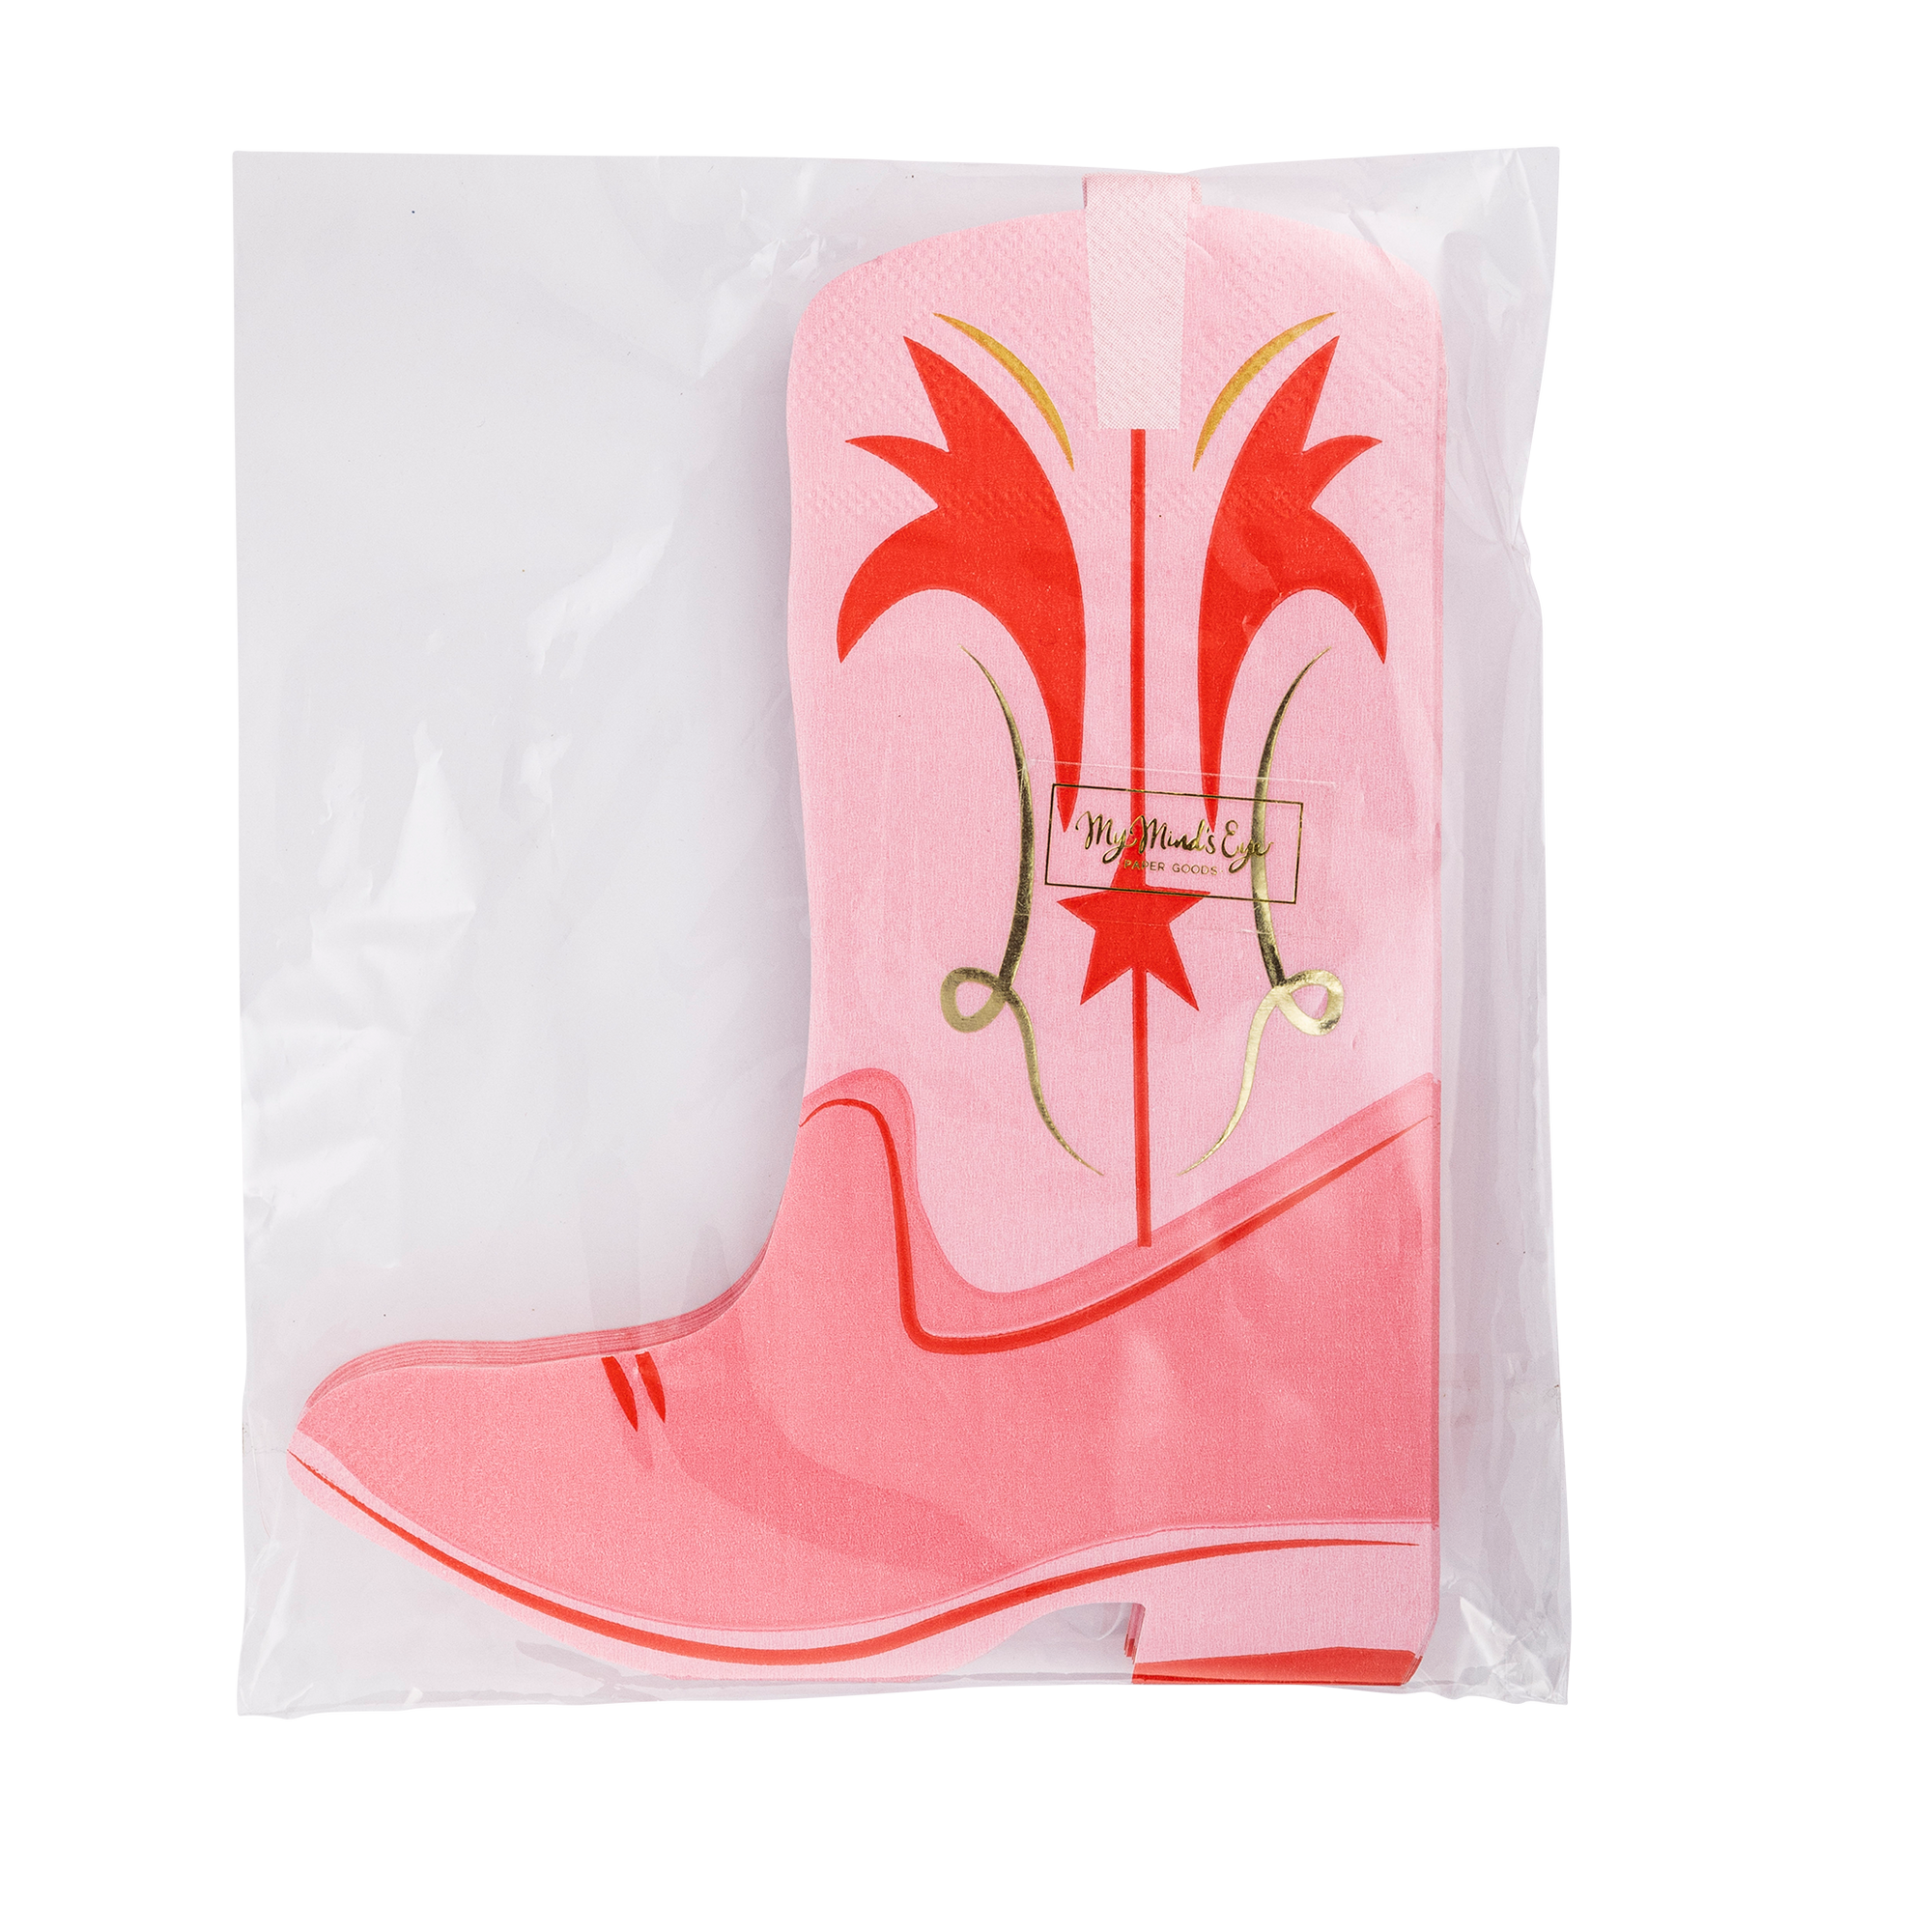 Pink Cowgirl Boot Napkins